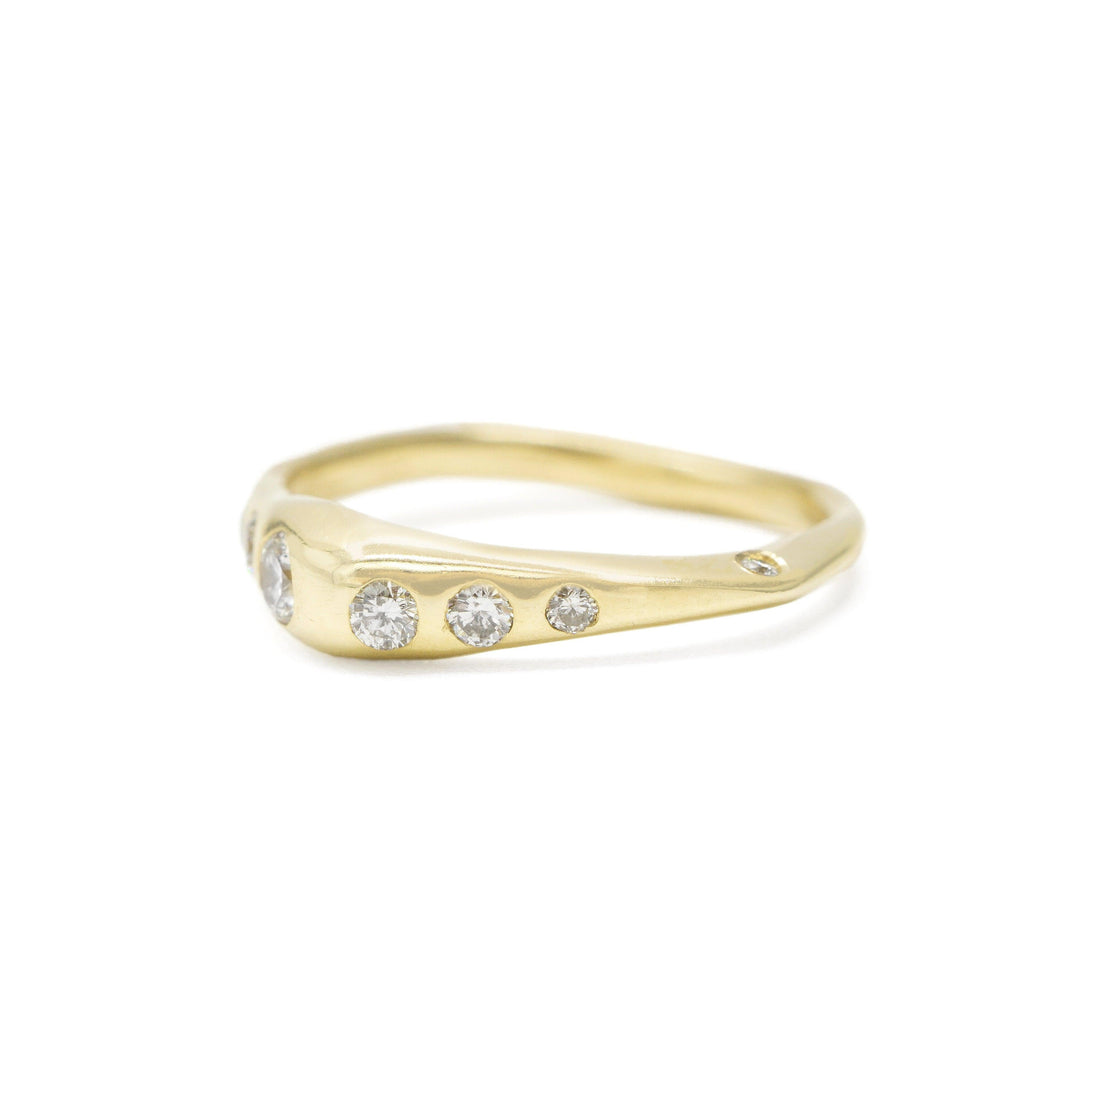 Hidden Diamond Astra Band in 14k yellow gold with diamond accents by Erin Cuff Jewelry.